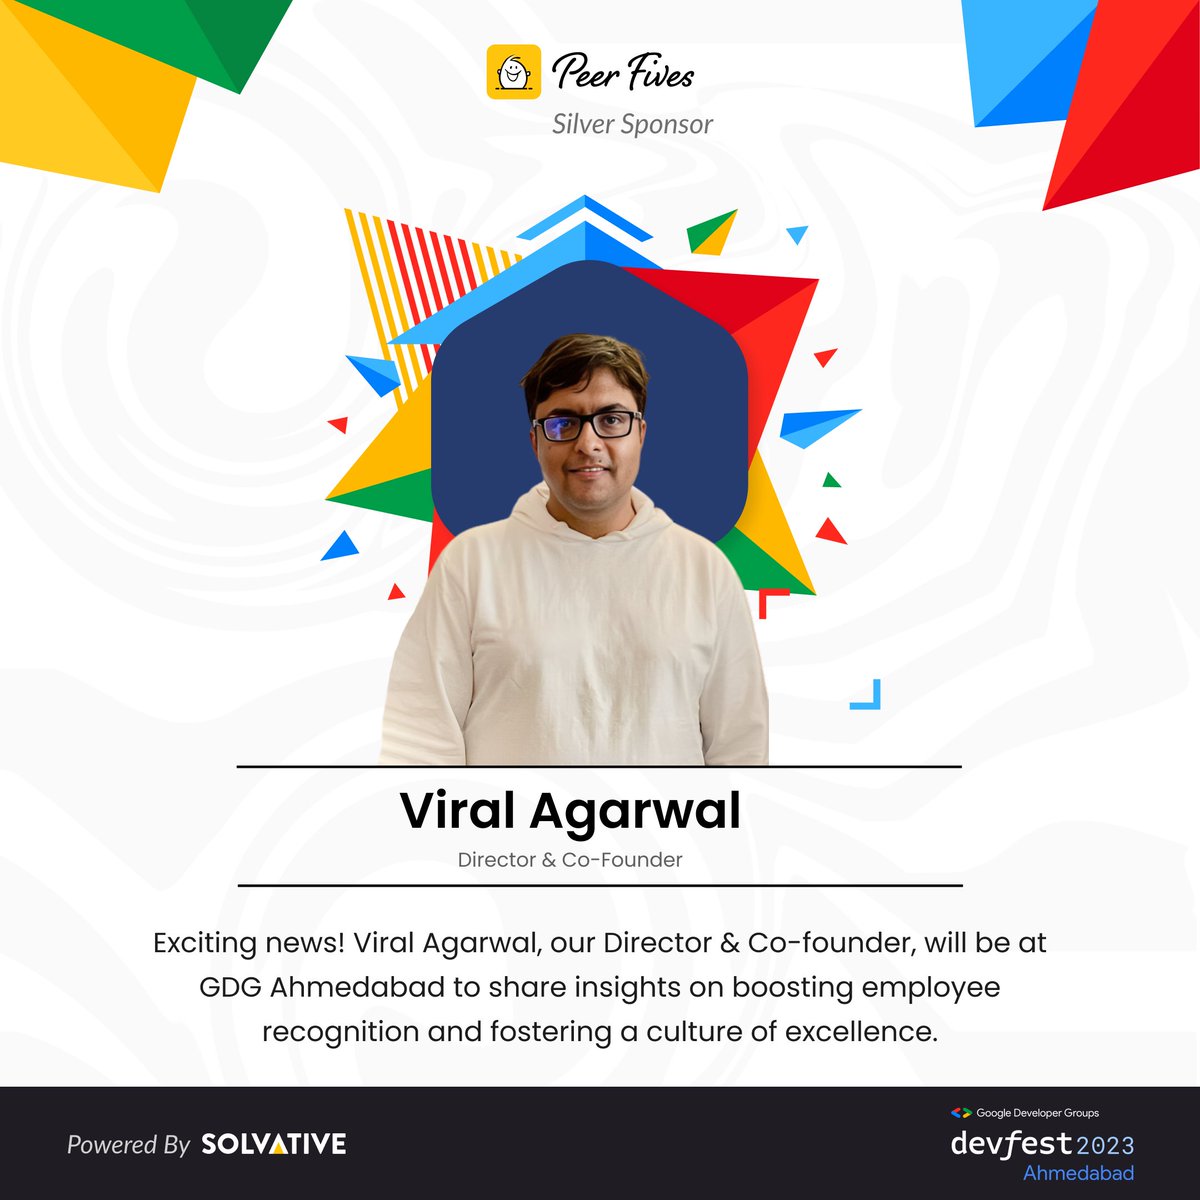 Viral Agrawal Agarwal representing Peer Fives at GDG Ahmedabad. His insights on fostering a culture of excellence are not to be missed. See you there! #DevFestAhm #silversponsor #GDG #TechCommunity #DevFest2023 #Gratitude